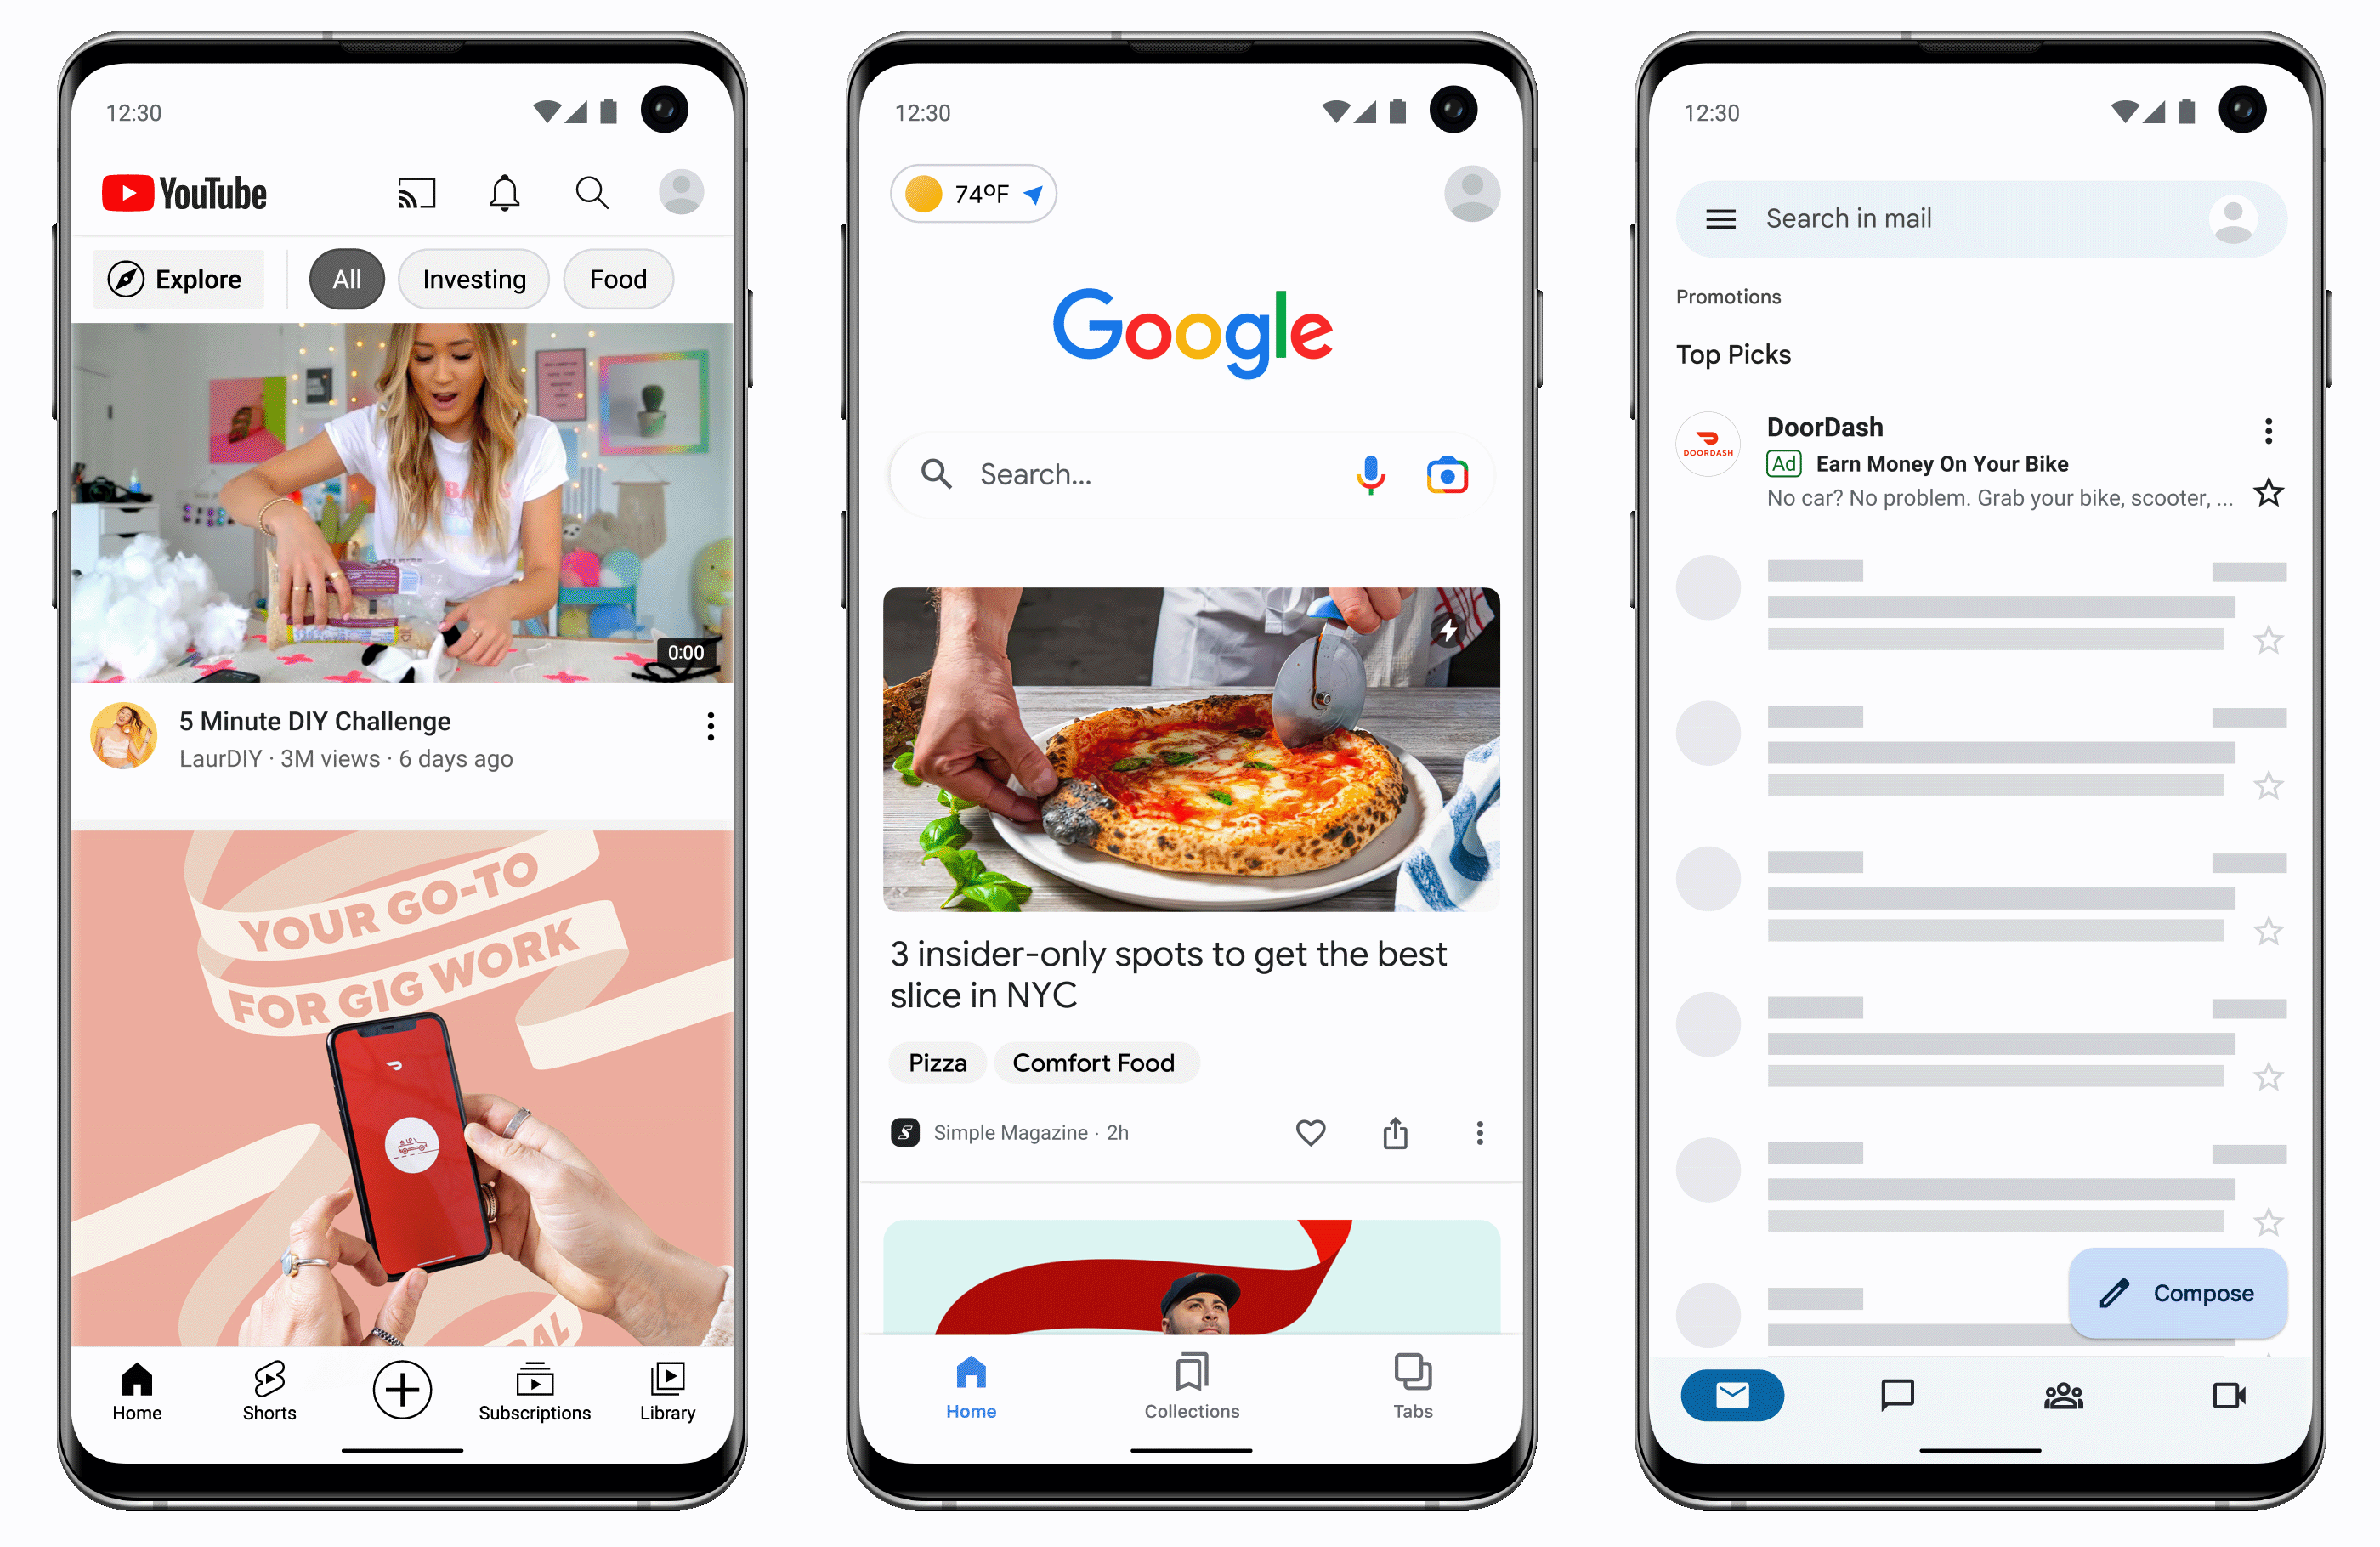 Example Discovery ad by DoorDash